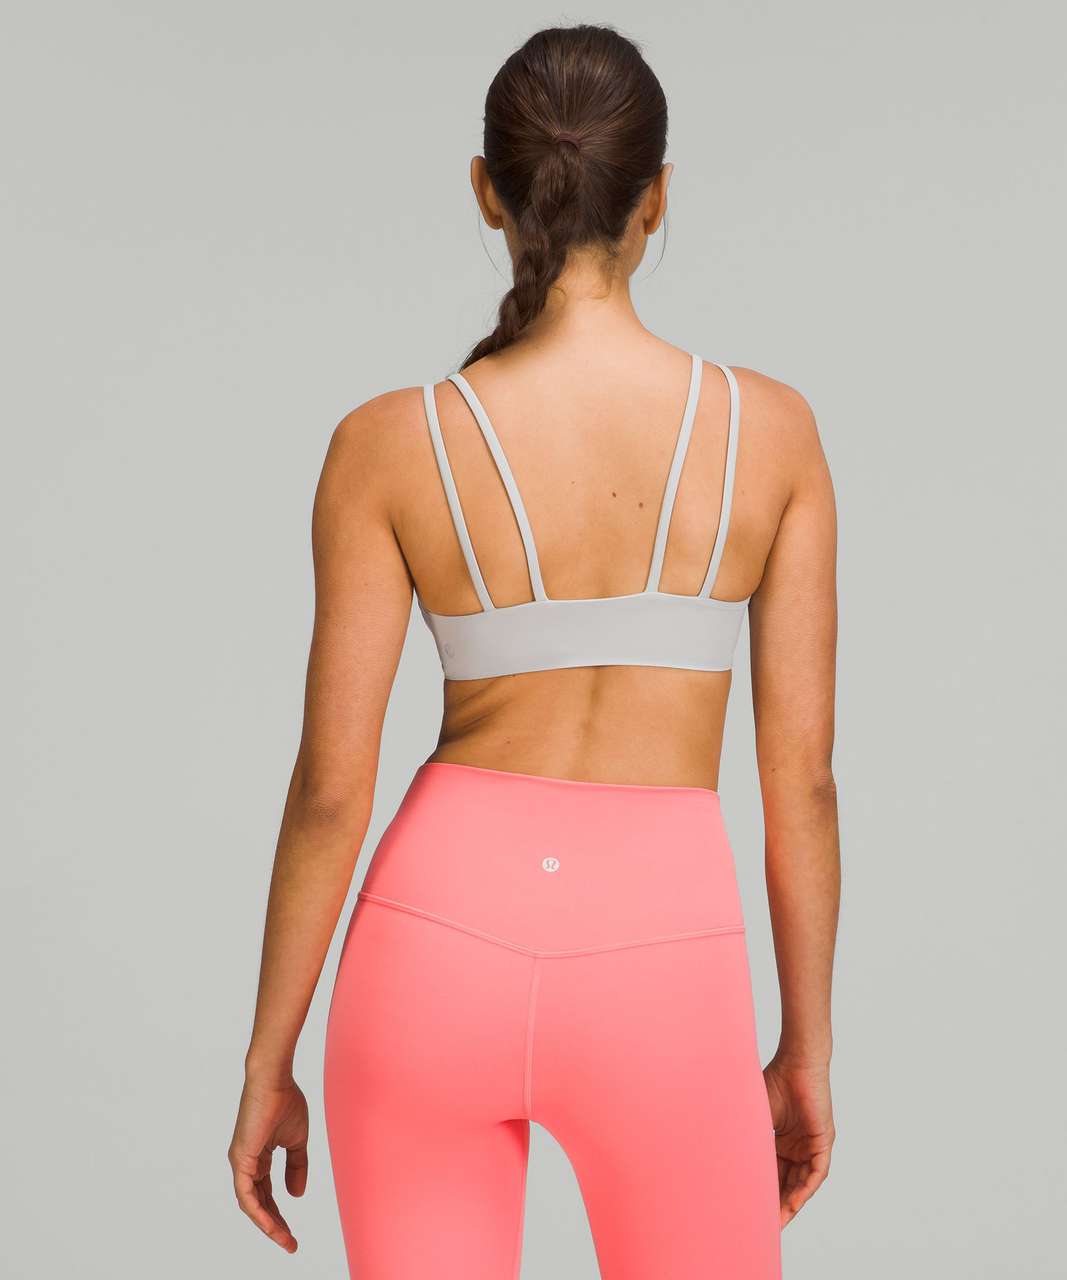 Whats the name of the under bra? : r/lululemon